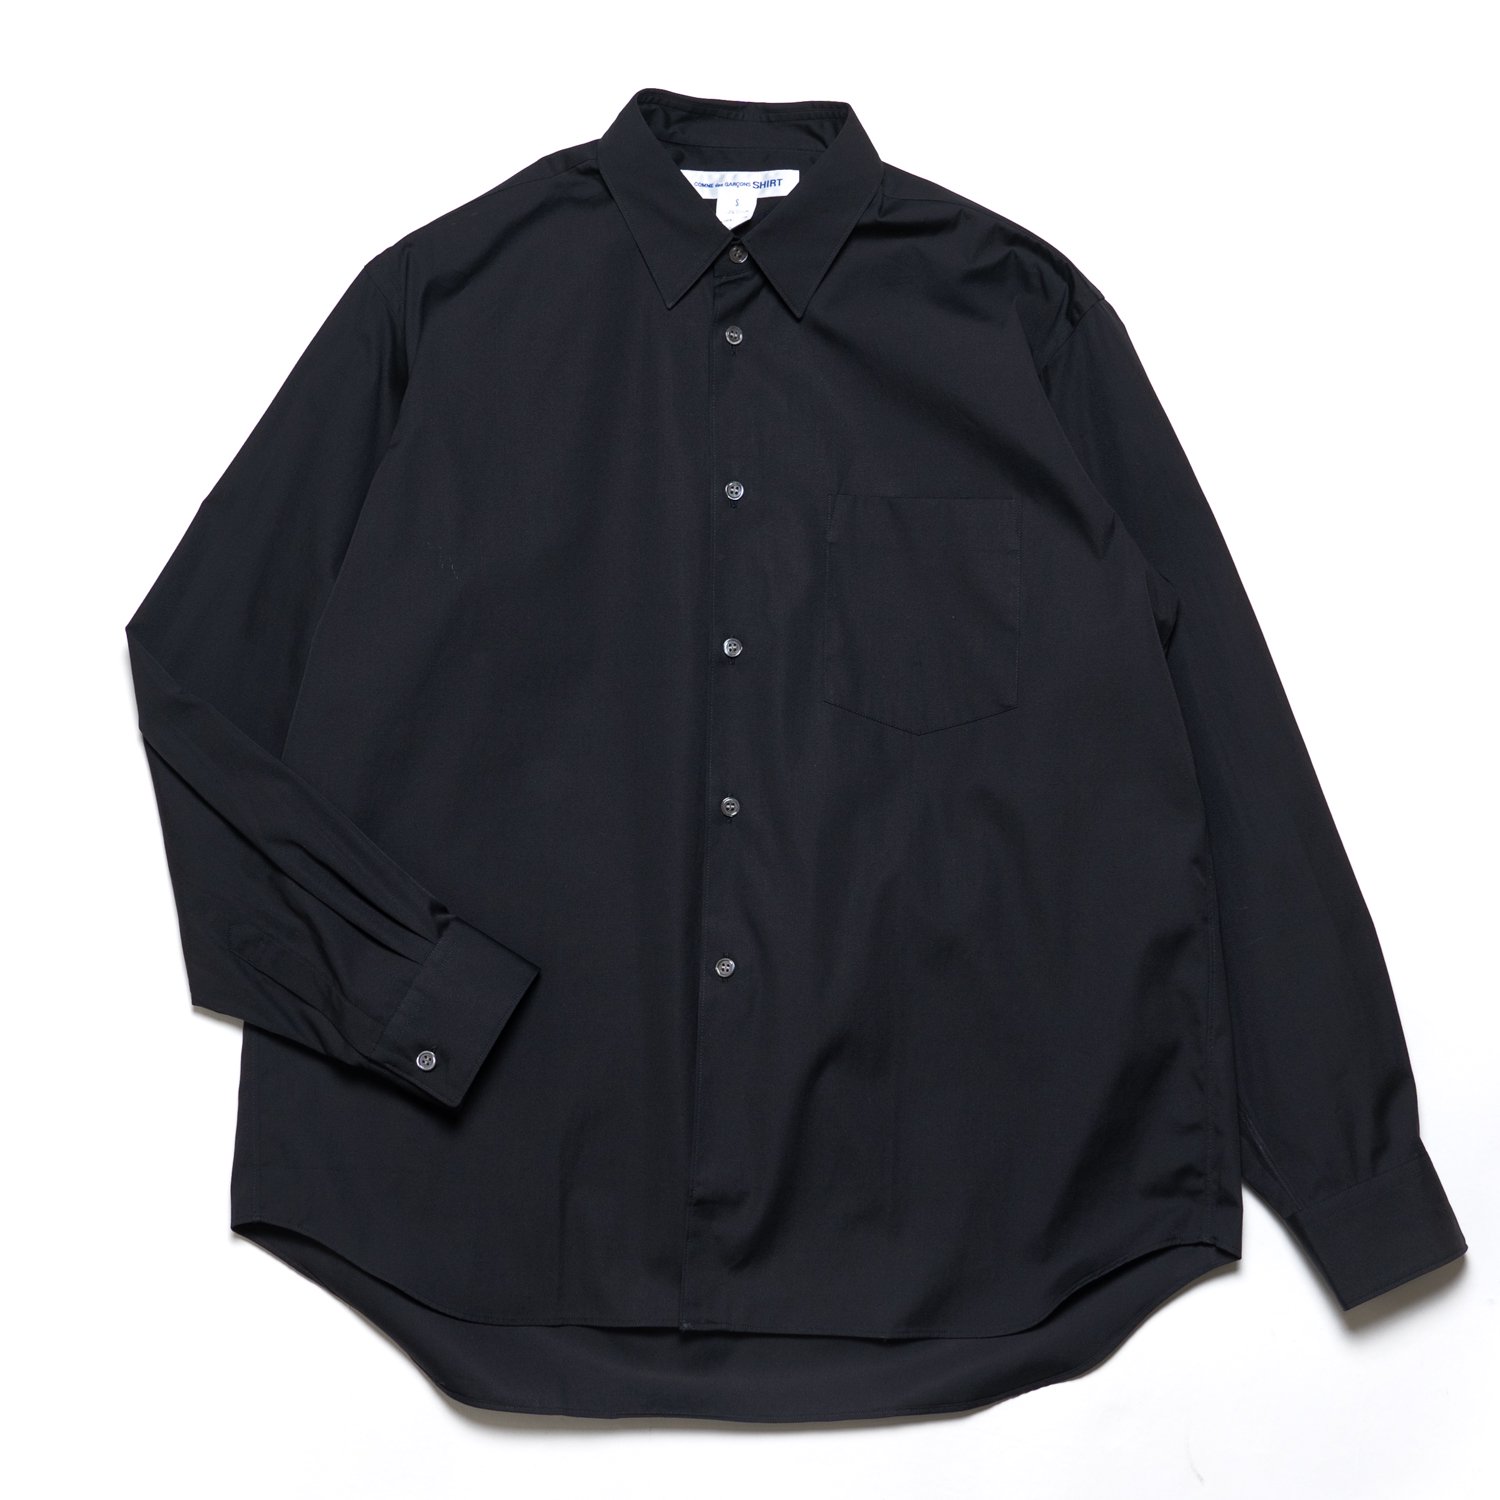 COMME des GARCONS SHIRT FOREVER グレー